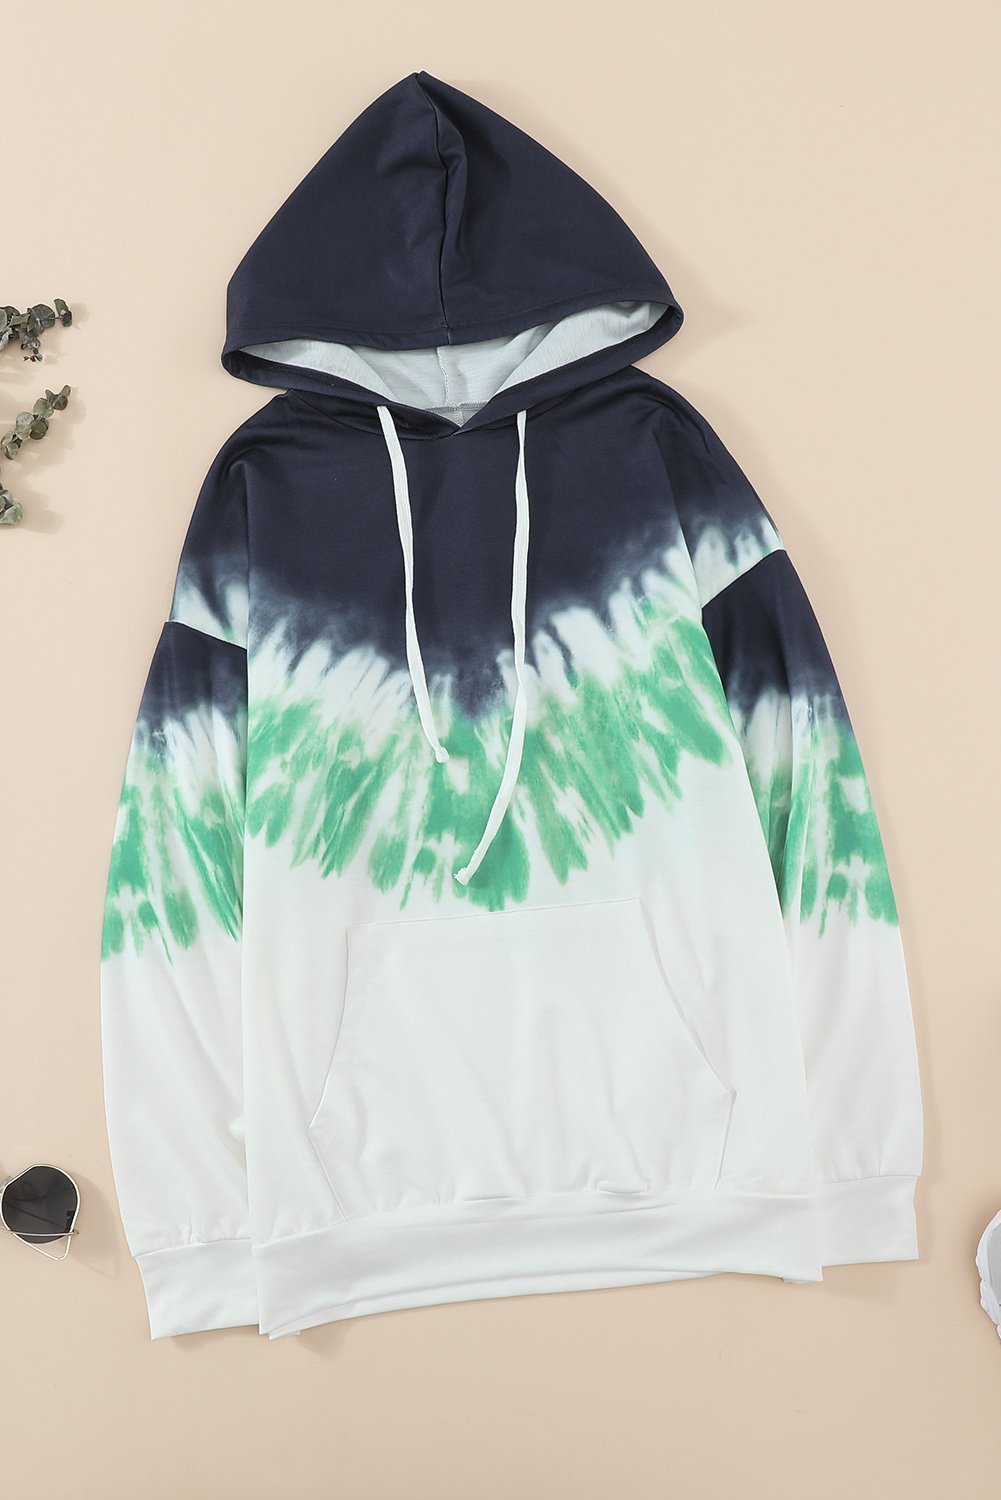 Picture of a Radiant Sunset Tie-Dye Hoodie in black and green